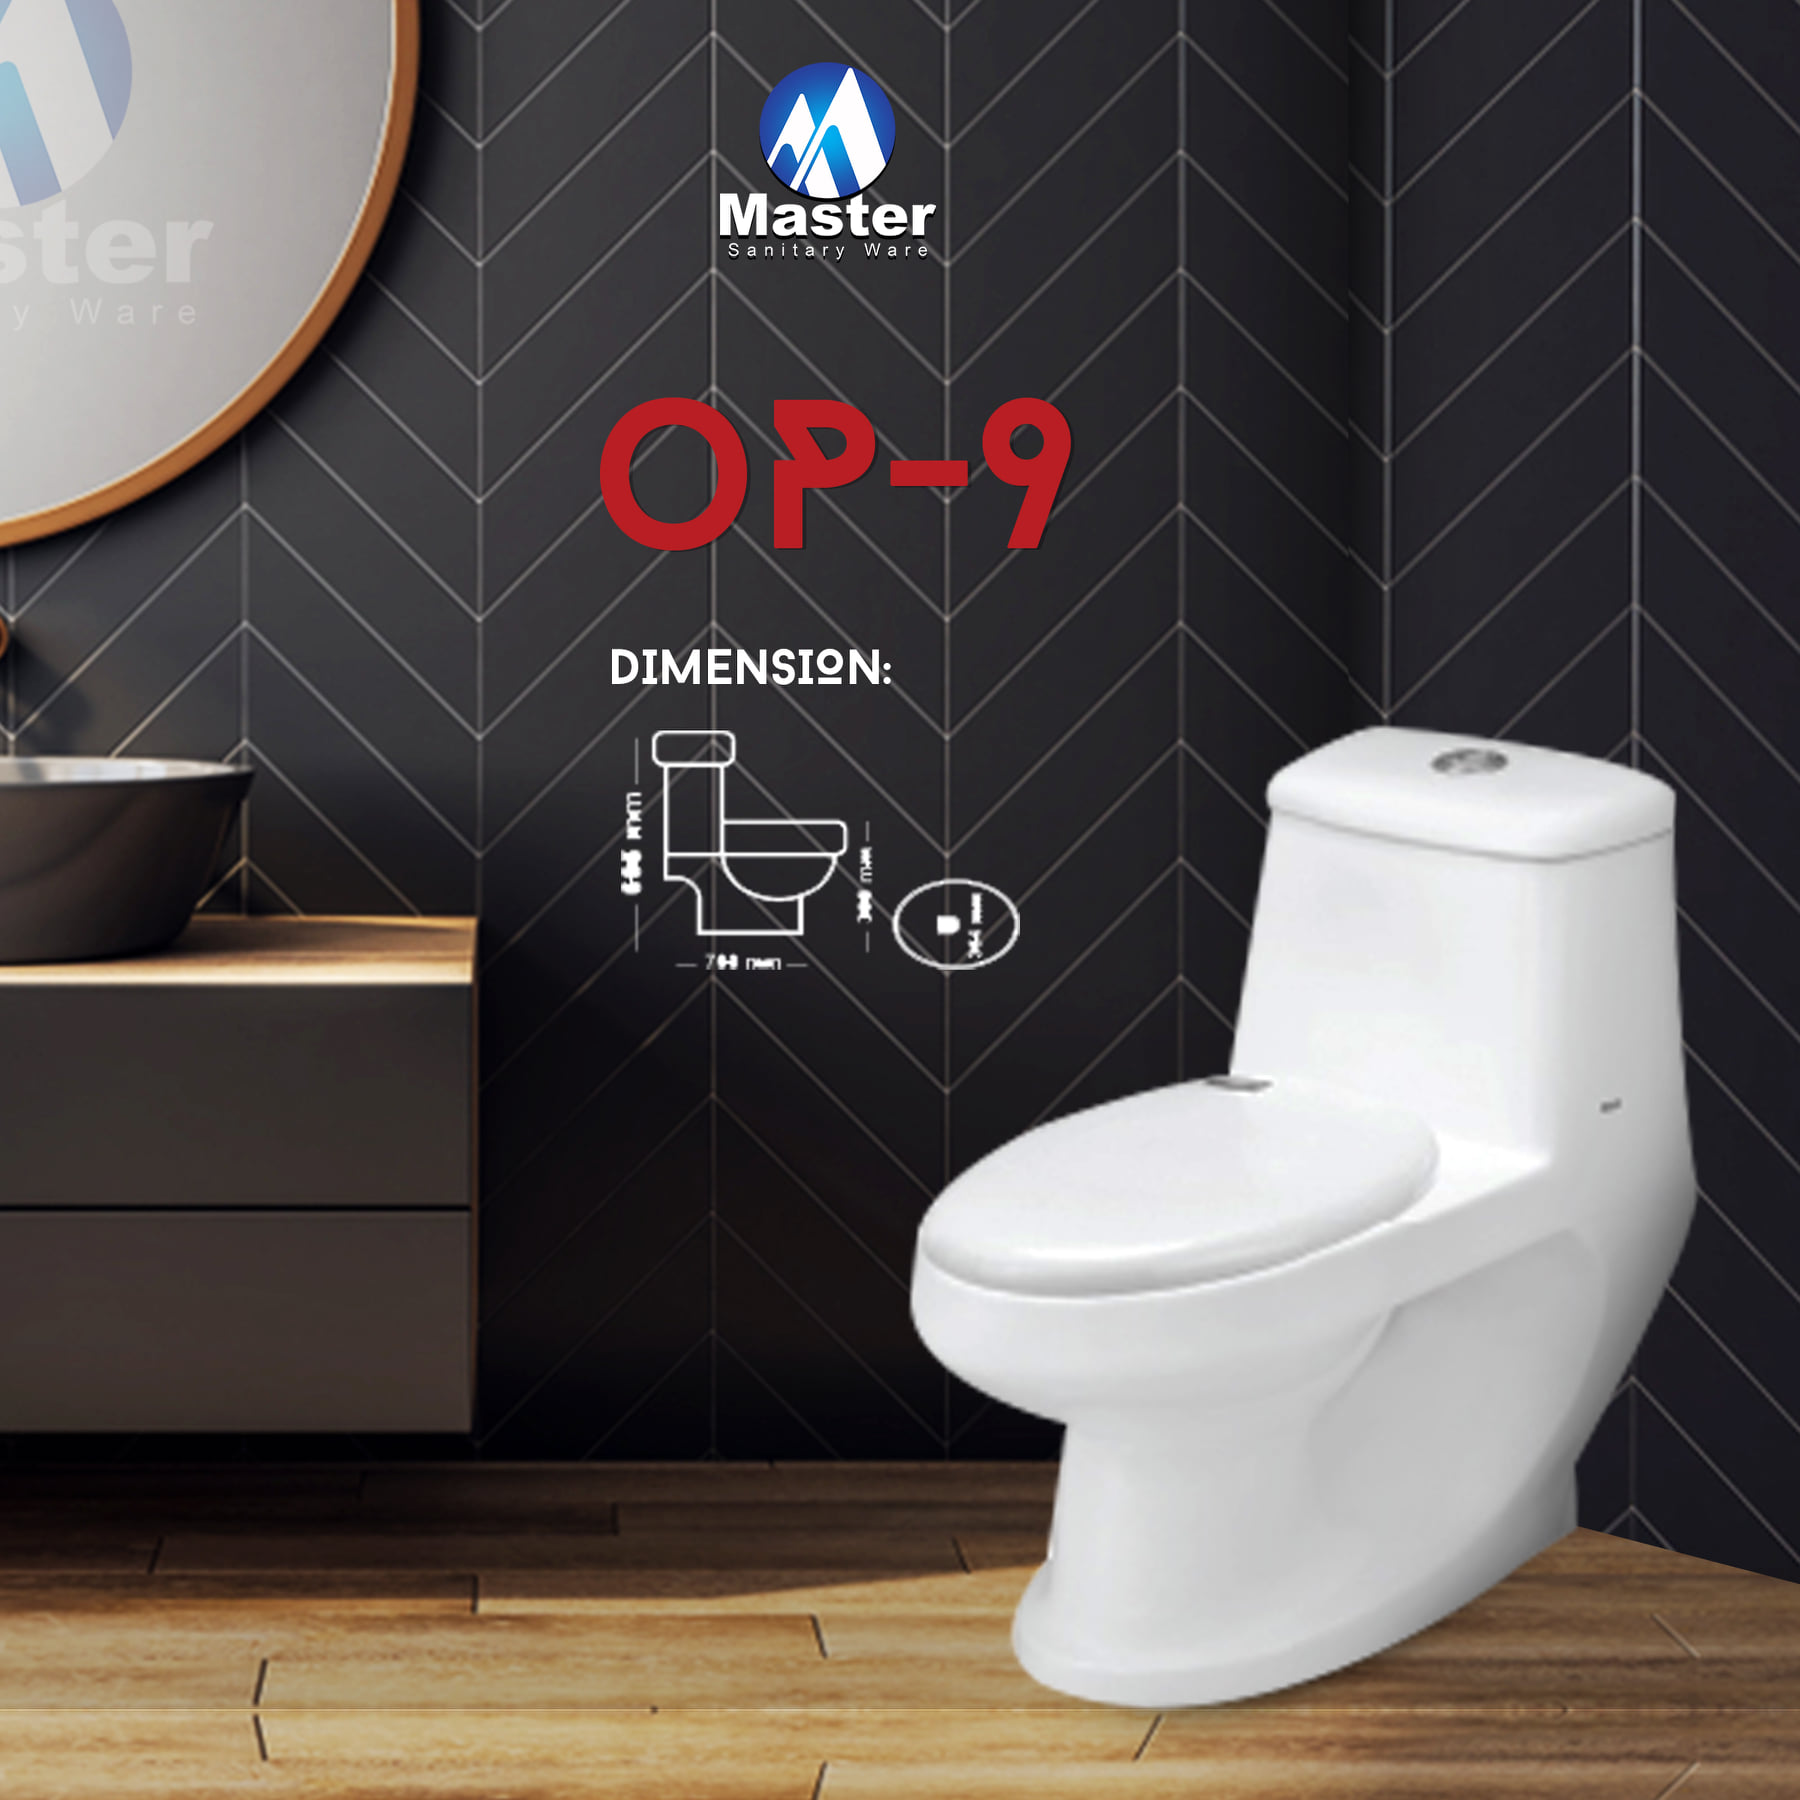 1-Piece Commode Code OP 09 Master Sanitary Ware